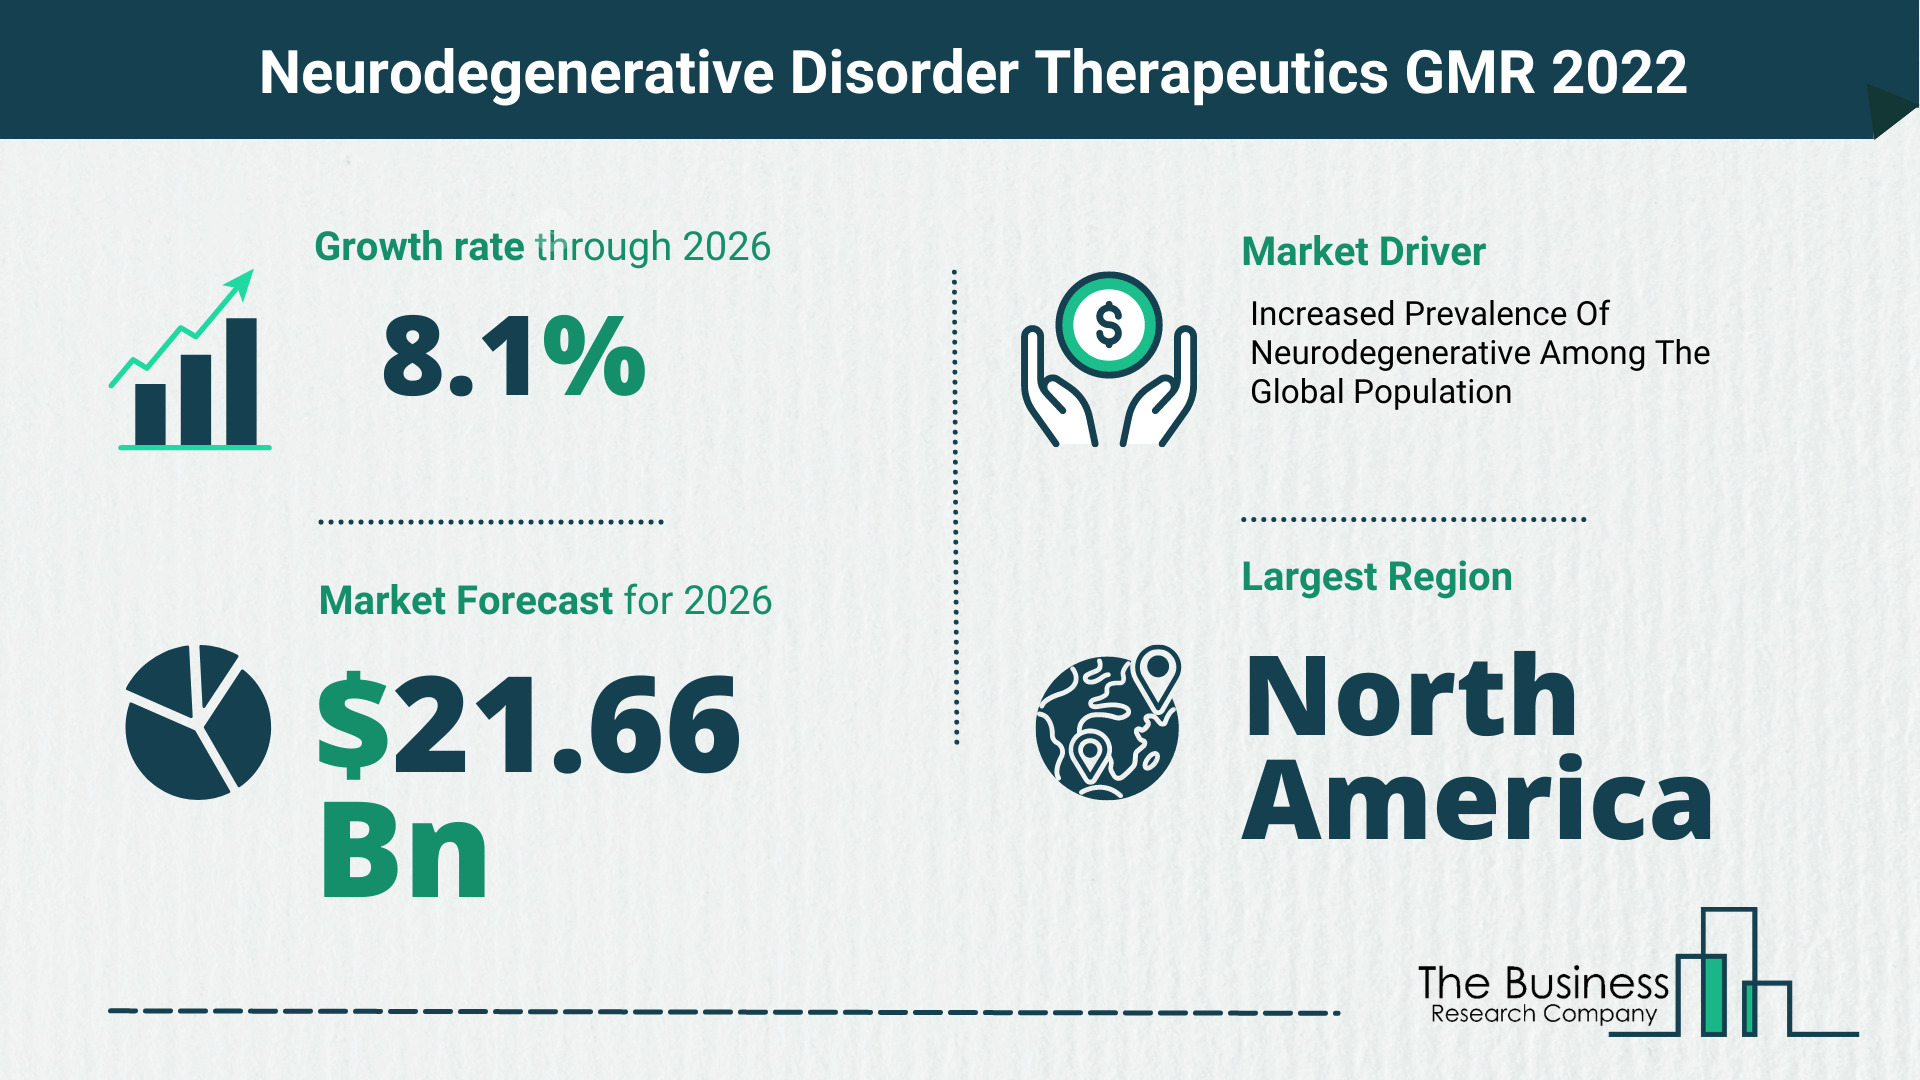 The Neurodegenerative Disorder Therapeutics Market Share, Market Size, And Growth Rate 2022